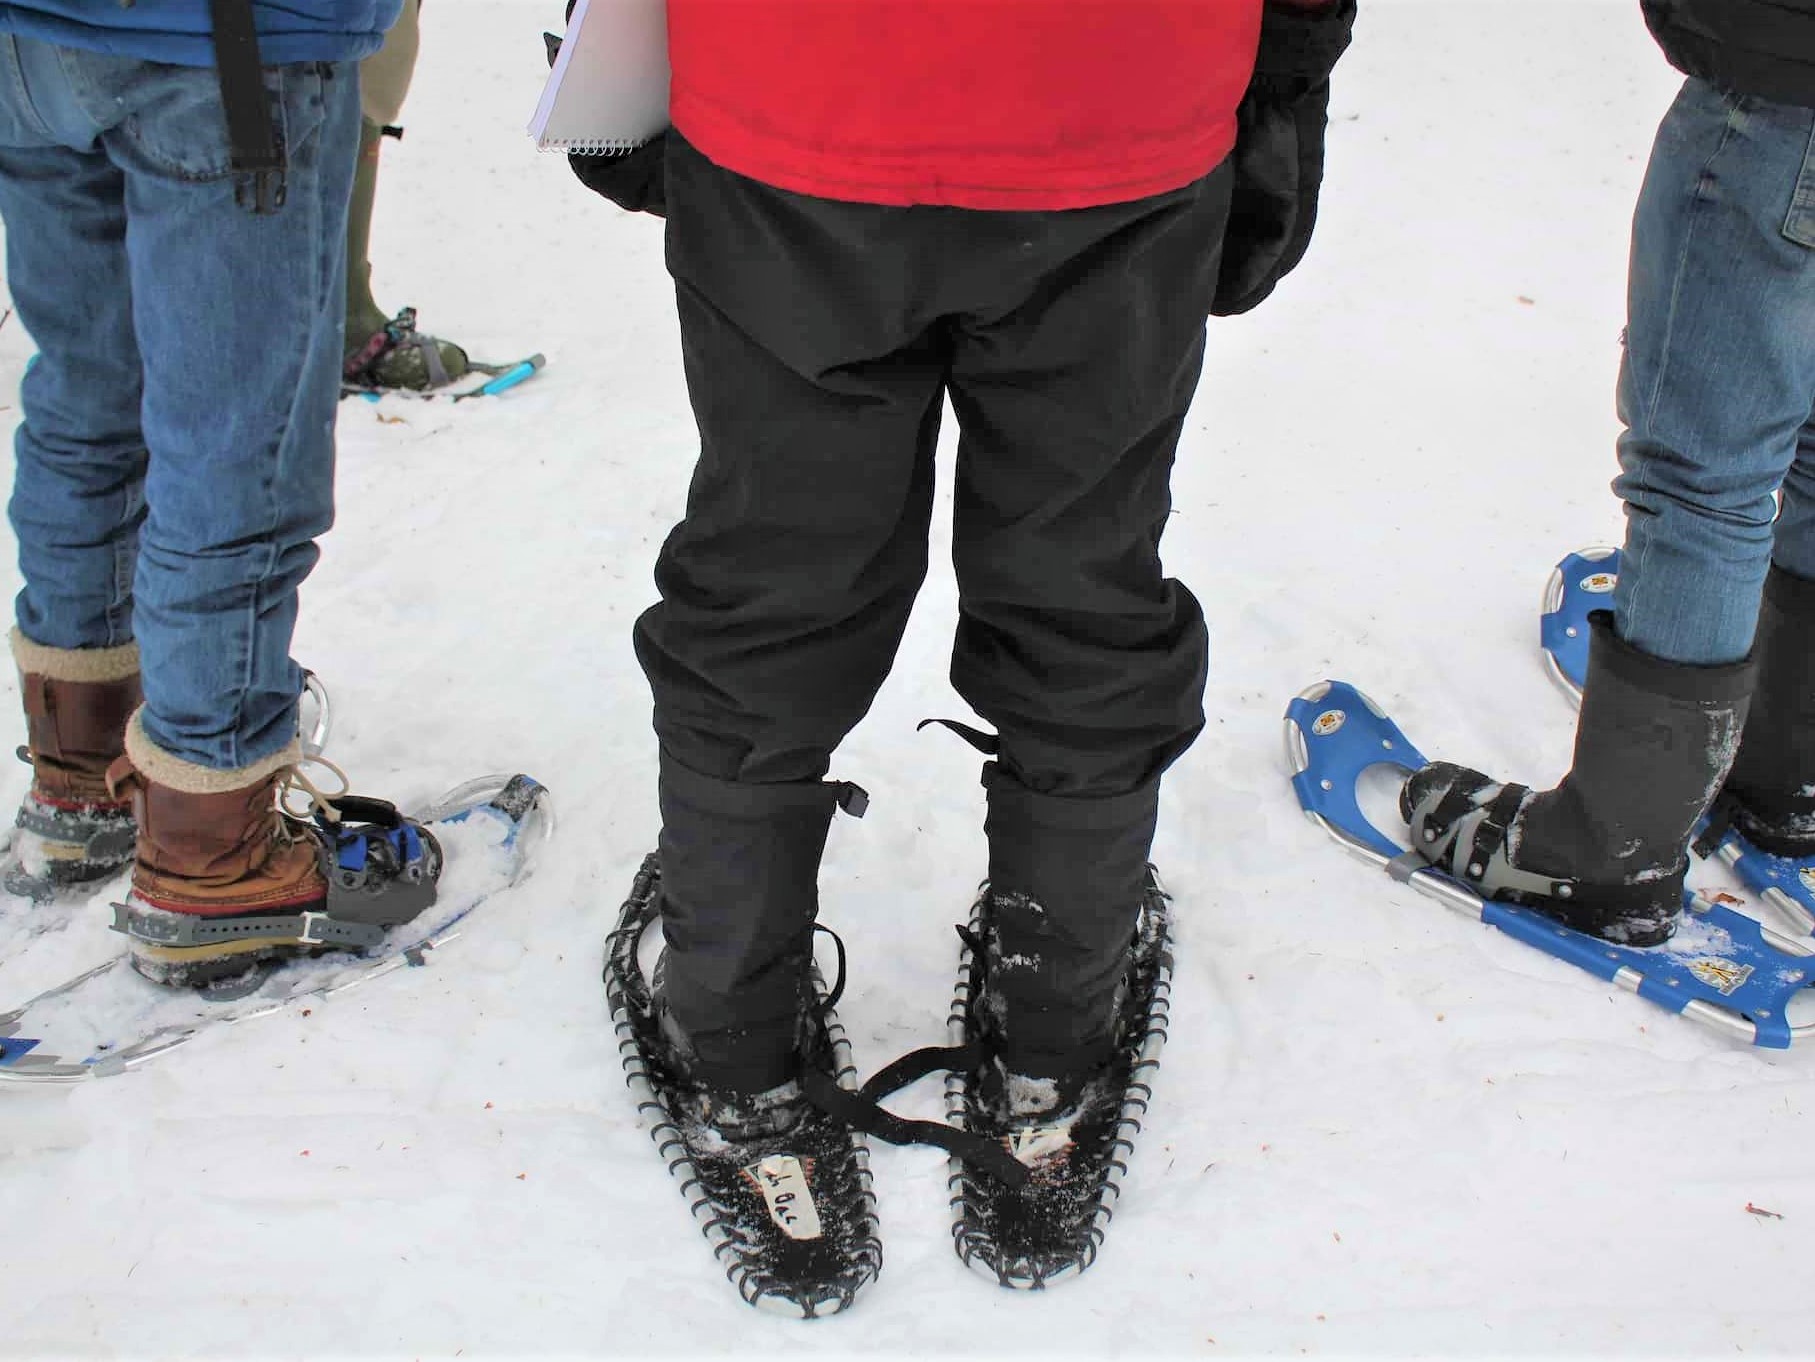 can I wear jeans while snowshoeing